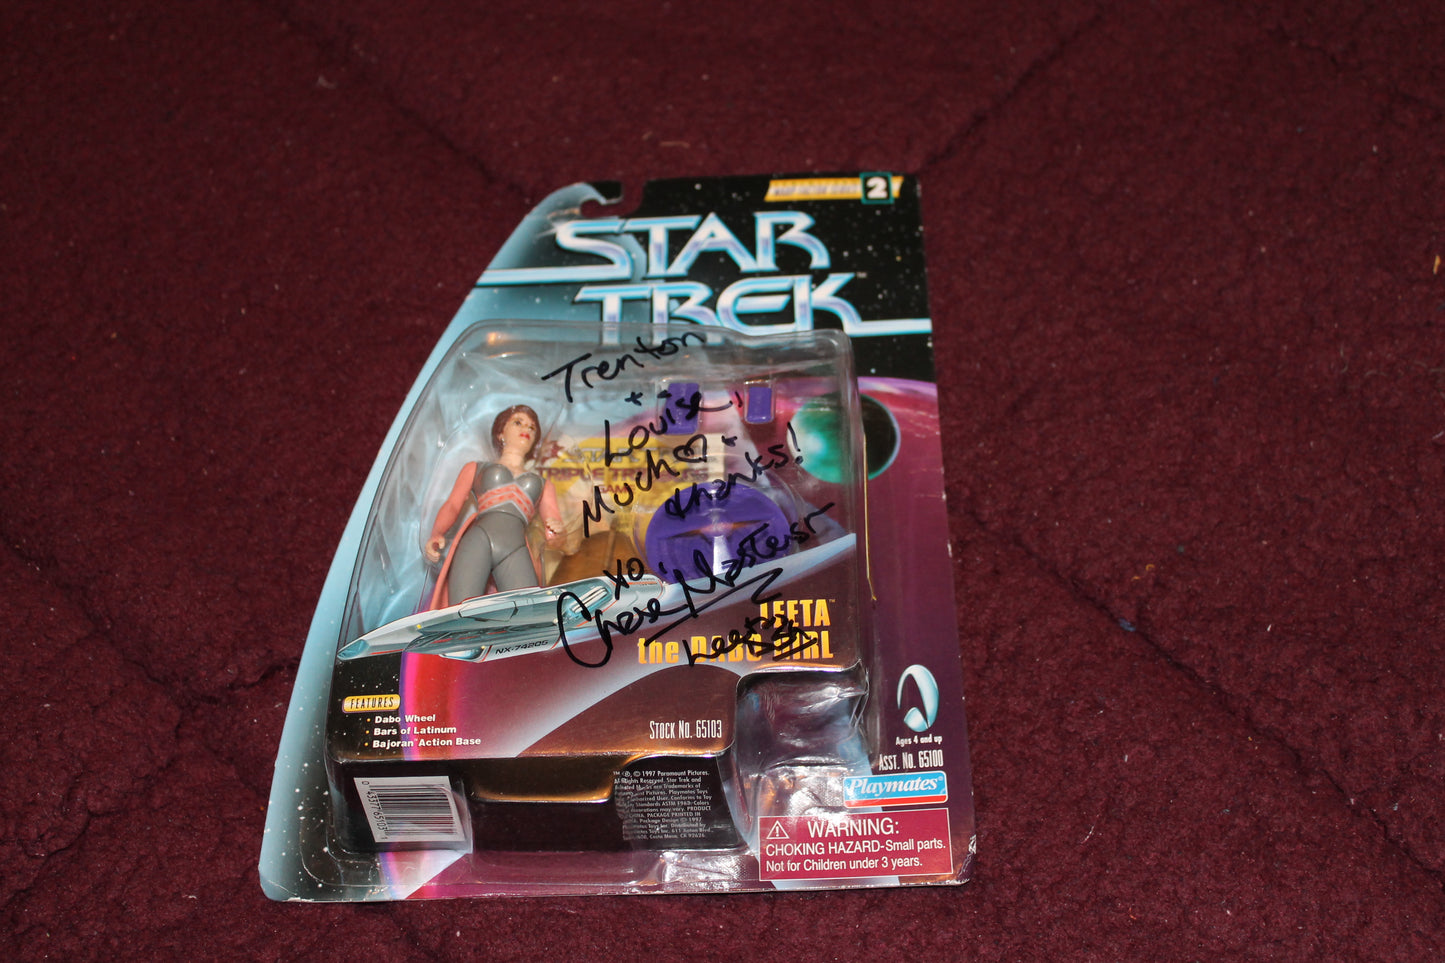 Leeta the Dabo Girl Action Figure AUTOGRAPHED by Chase Masterson